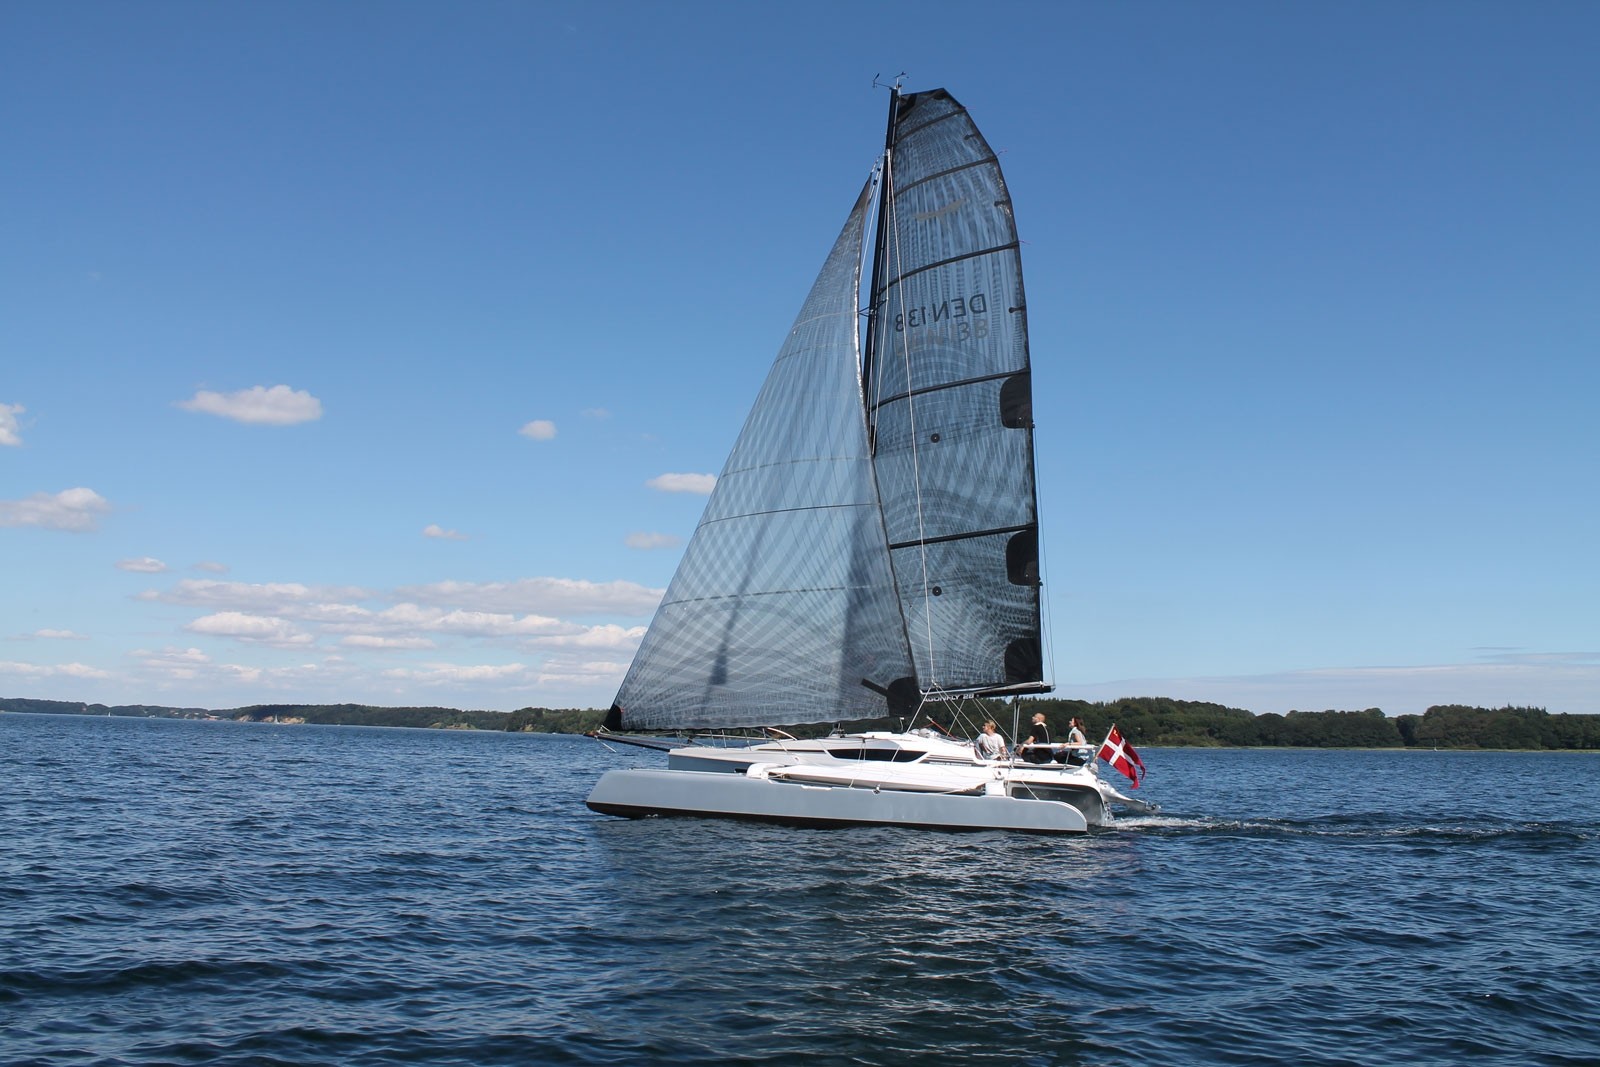 FOR SALE: Dragonfly 28 Performance, No. 200, 2019 year, incl. trailer